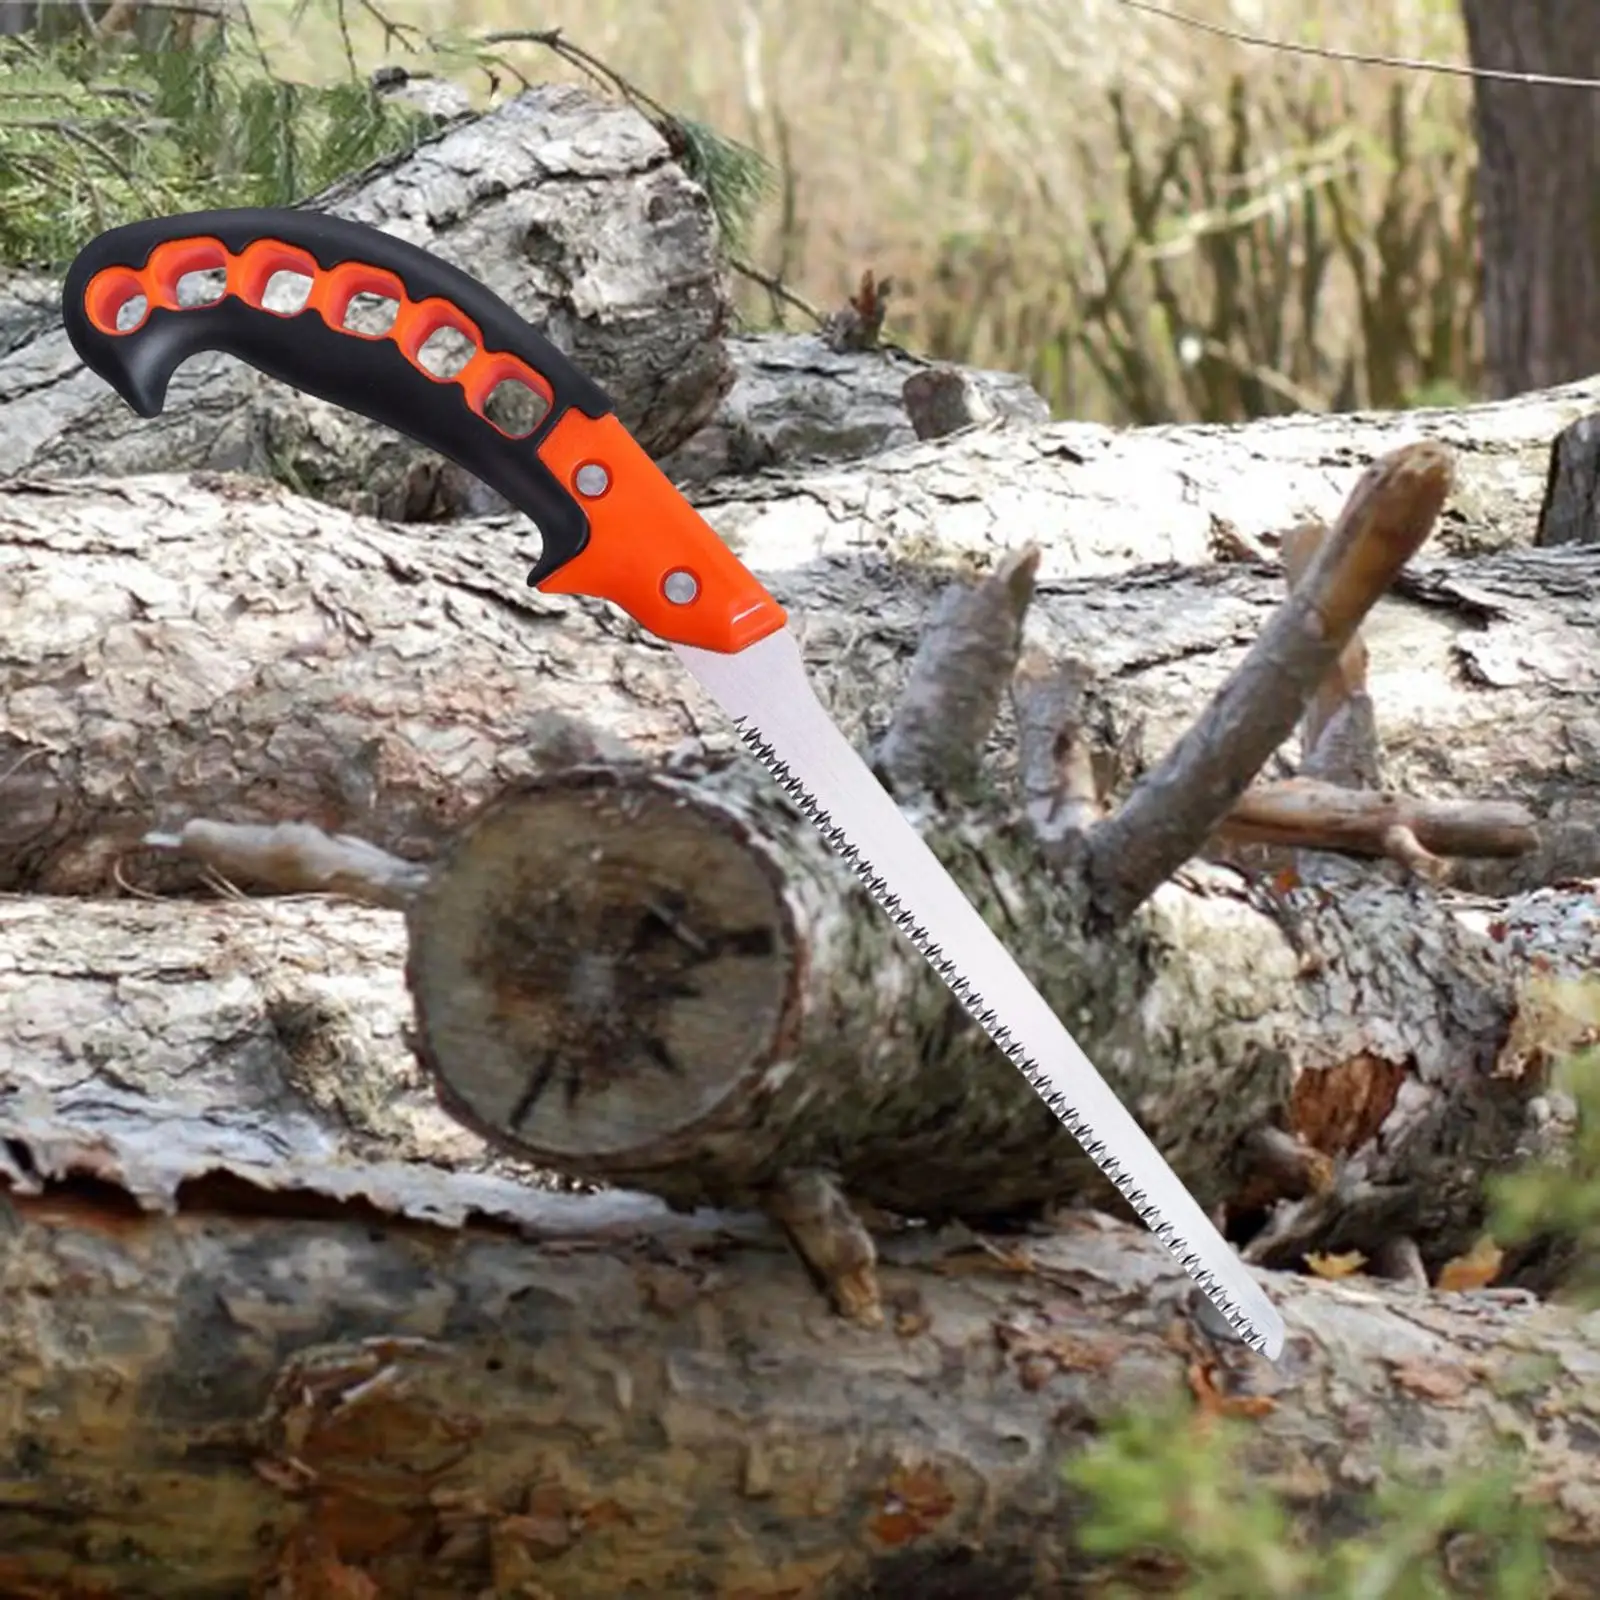 Garden Pruning Saw Woodworking Hacksaw Cutting Hand Tool for Camping Hunting Branches Gardening Backpacking